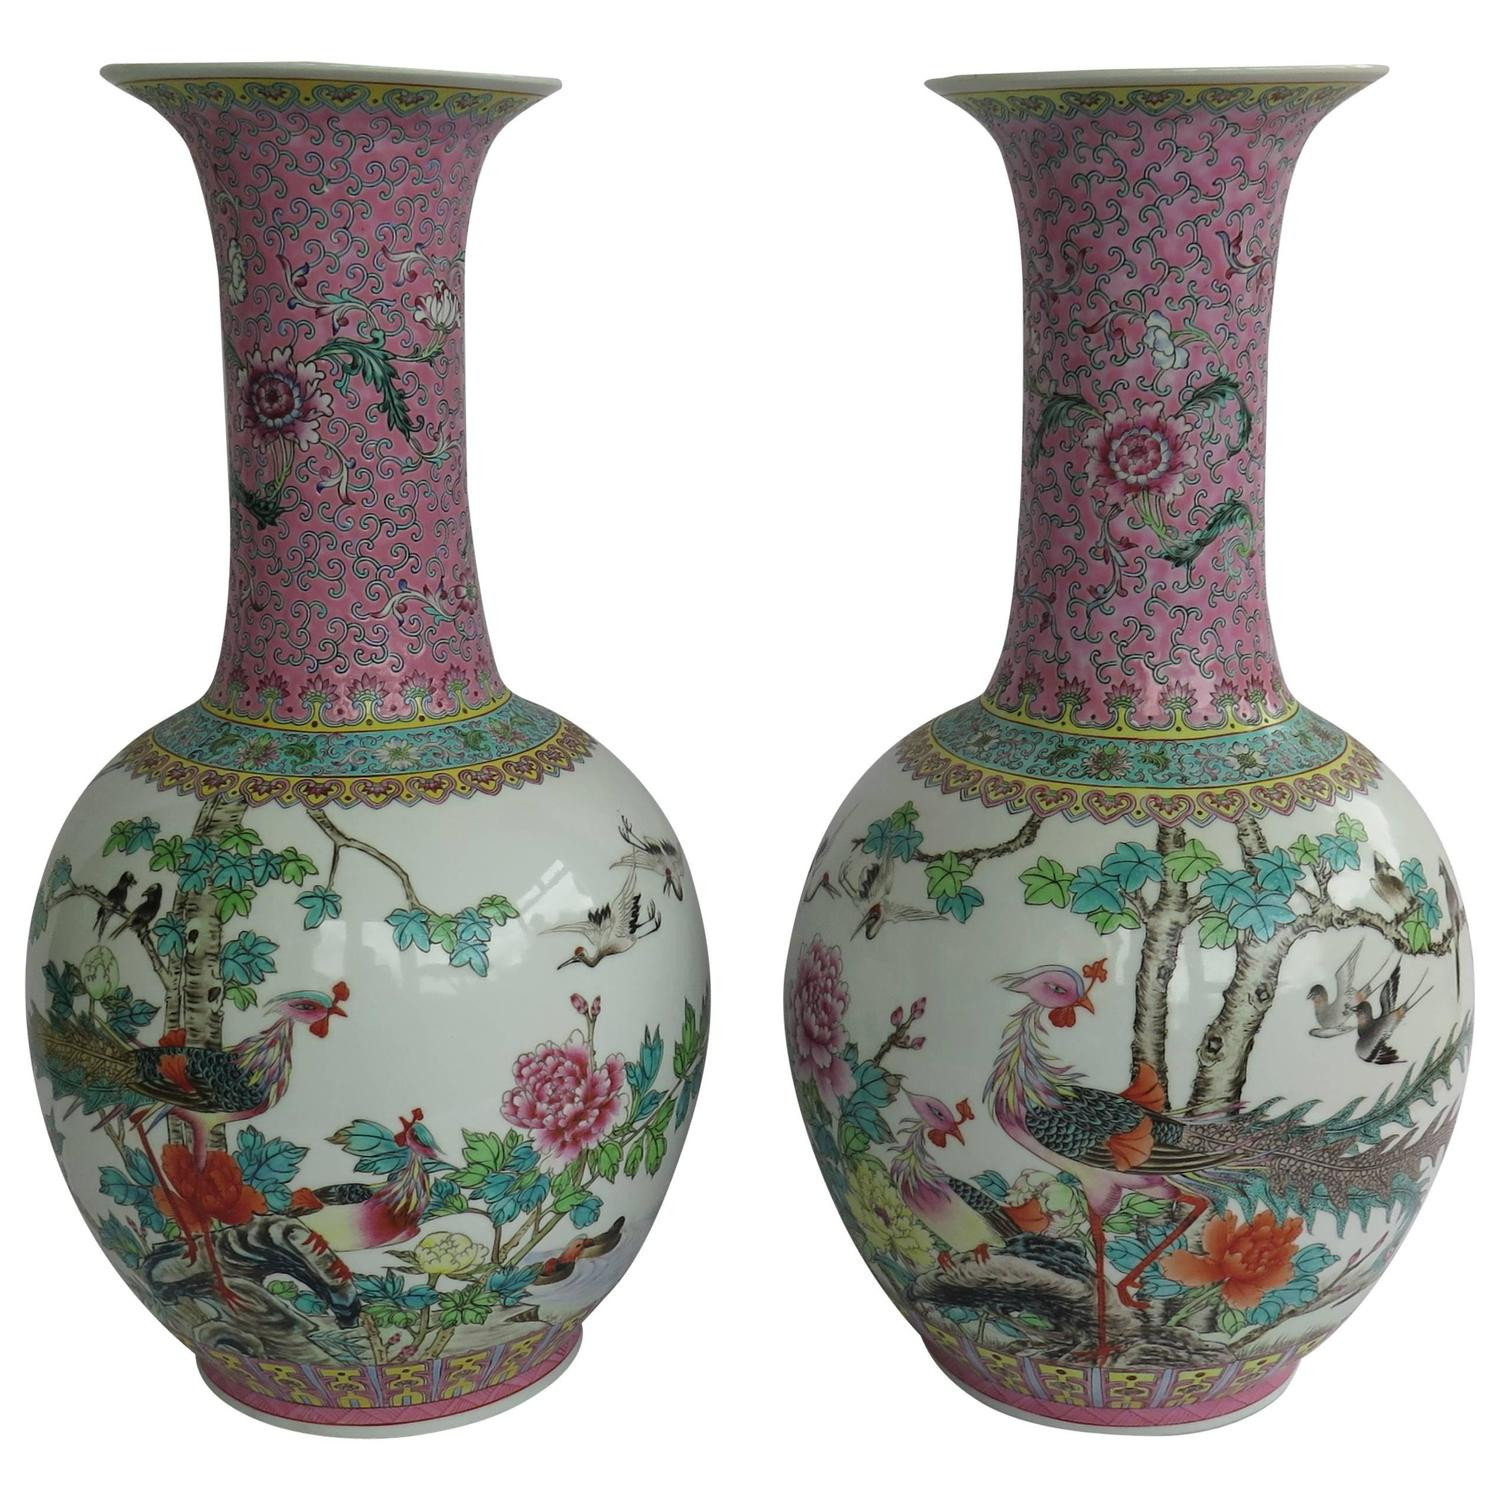 20 Fabulous Chinese Porcelain Vases for Sale 2022 free download chinese porcelain vases for sale of pair of chinese antique canton famille rose porcelain vases for sale within pair of chinese antique canton famille rose porcelain vases for sale at 1stdib